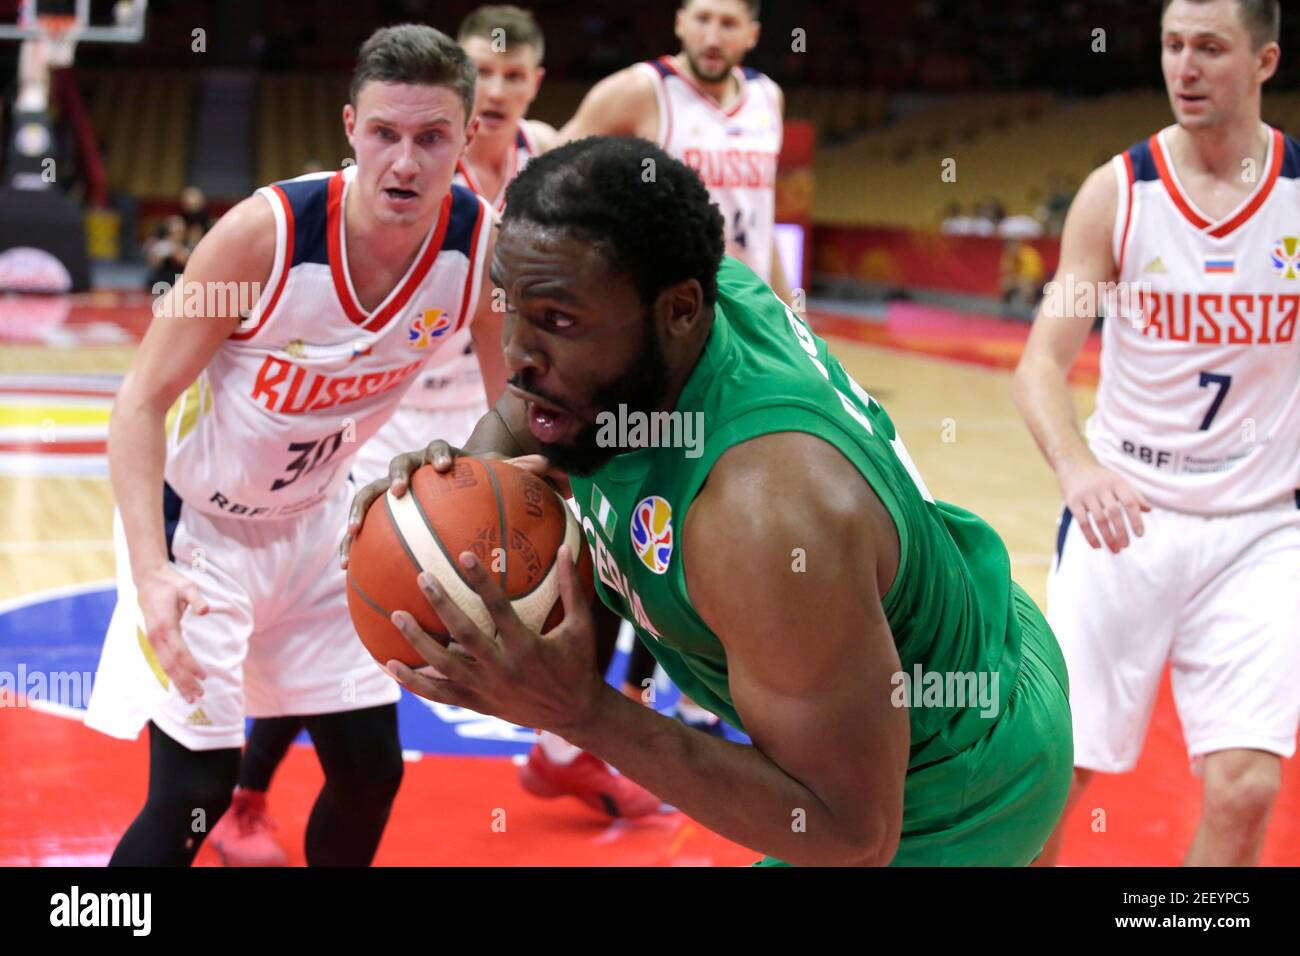 Basketball - FIBA World Cup - Russia v Nigeria - Wuhan Sports Center, Wuhan, China - August 31, 2019 Nigeria's Ike Diogu in action REUTERS/Jason Lee Stock Photo